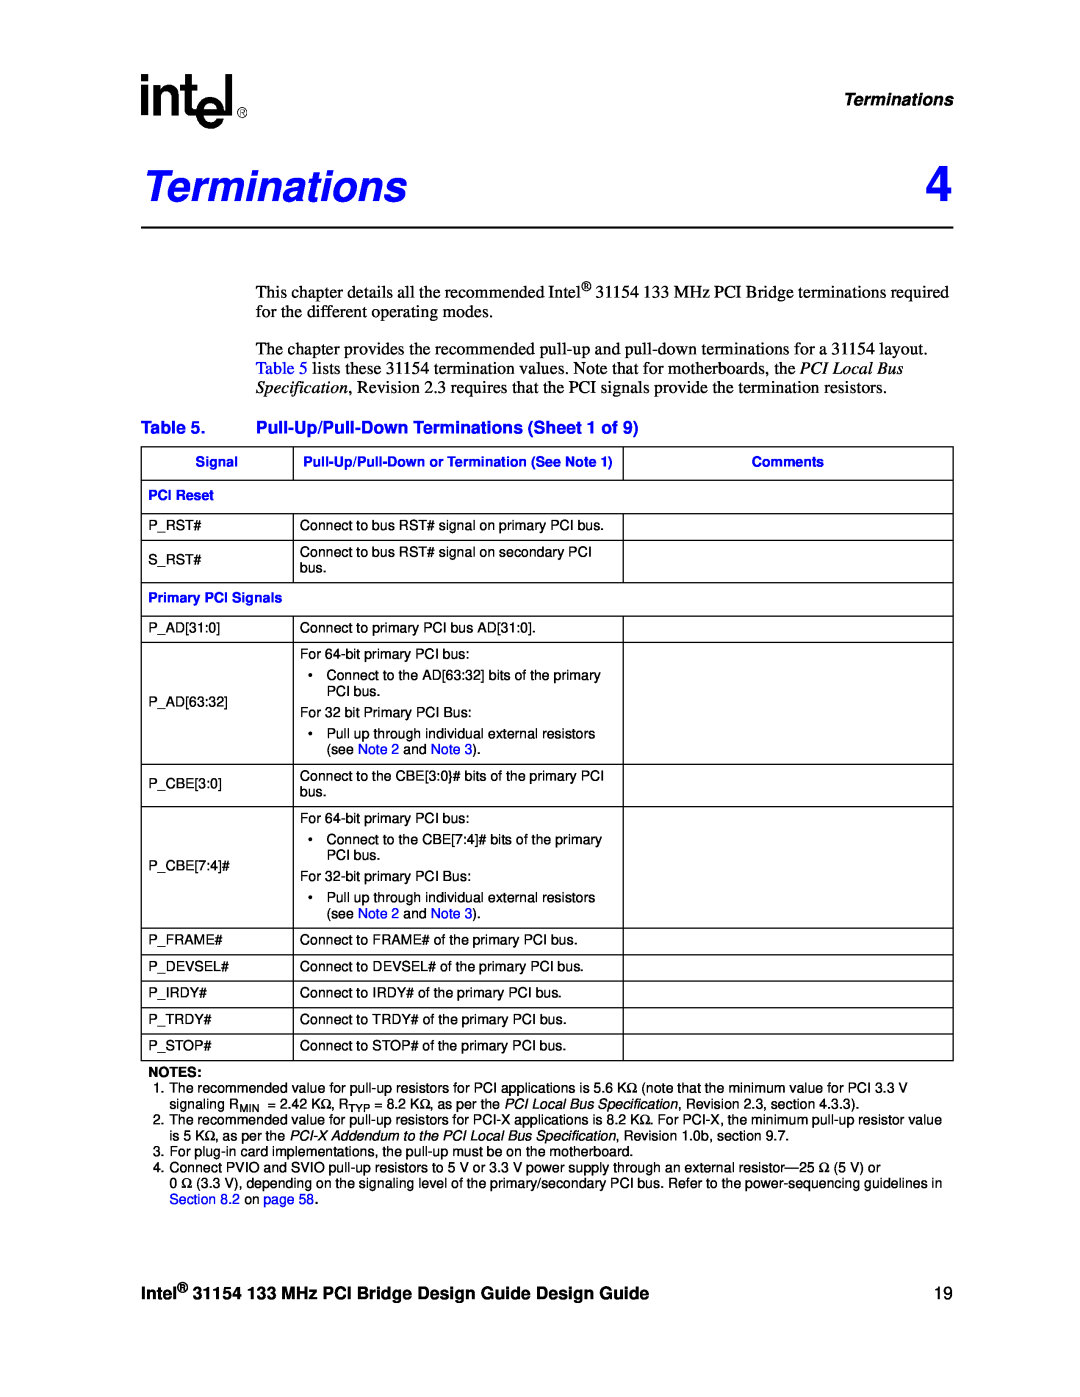 Intel 31154 manual Terminations4, Pull-Up/Pull-Down Terminations Sheet 1 of 